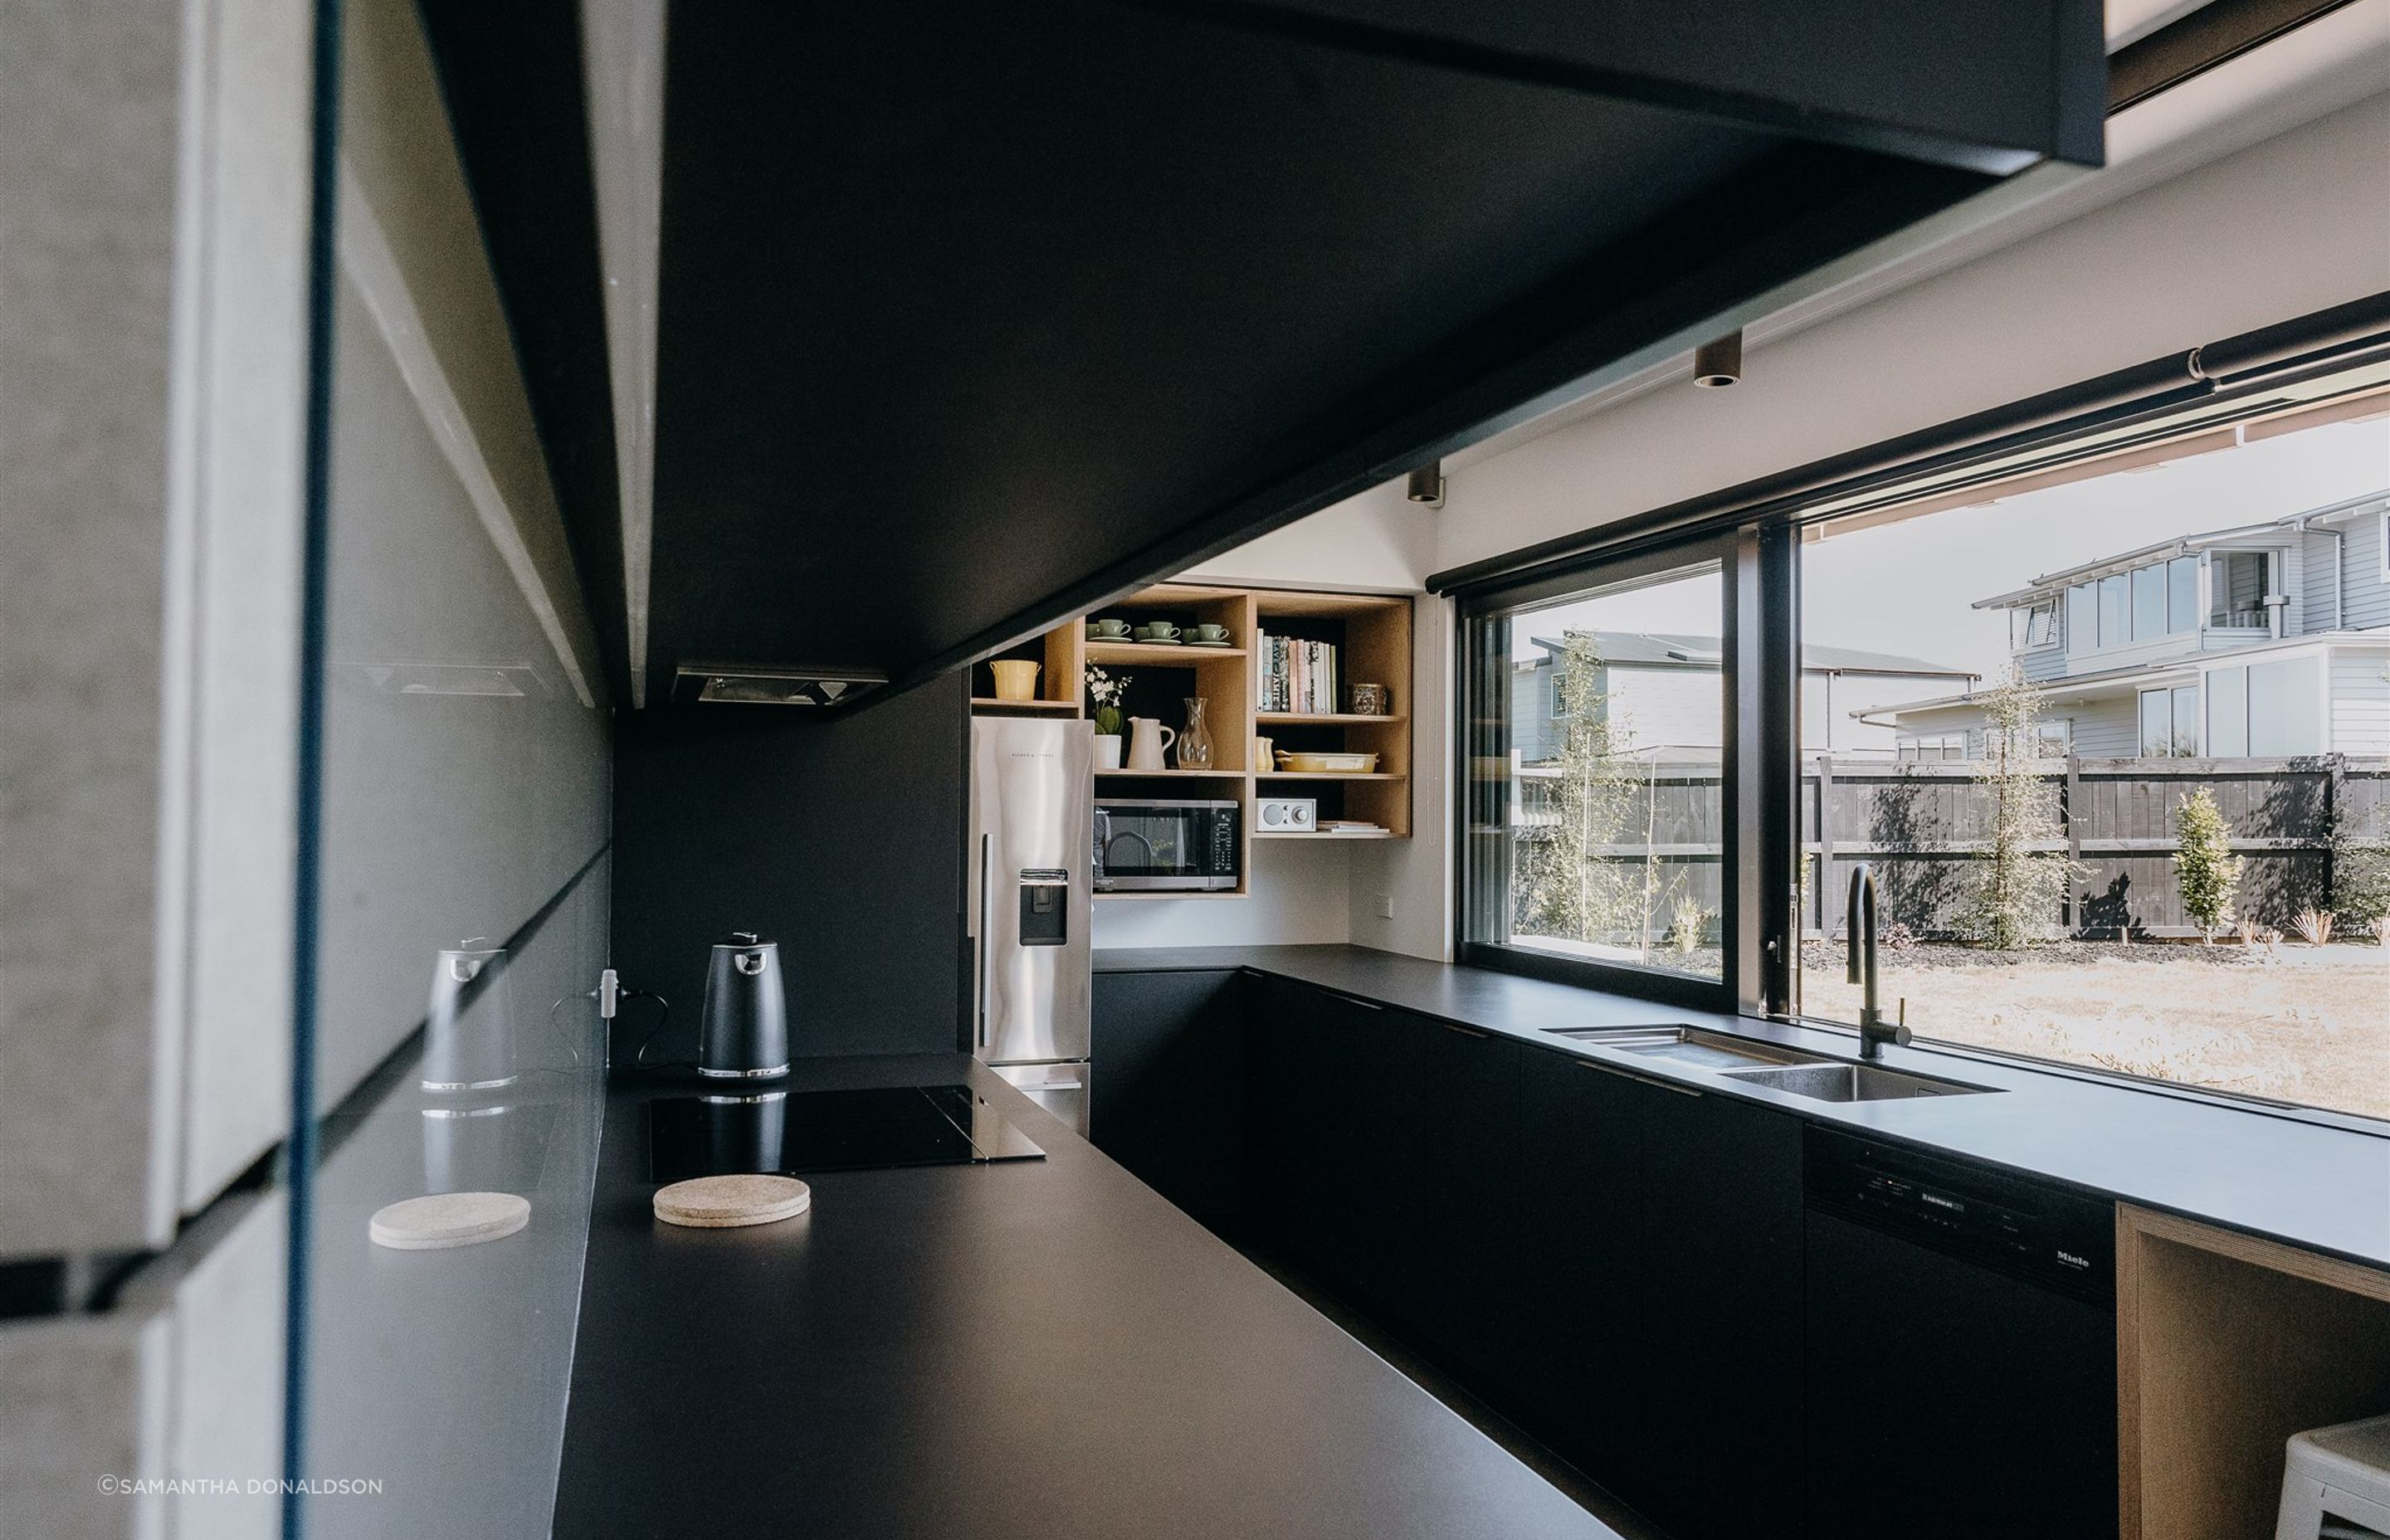 Matte black and timber are the central features in the kitchen, creating a consistent aesthetic in line with the other areas of the home. 